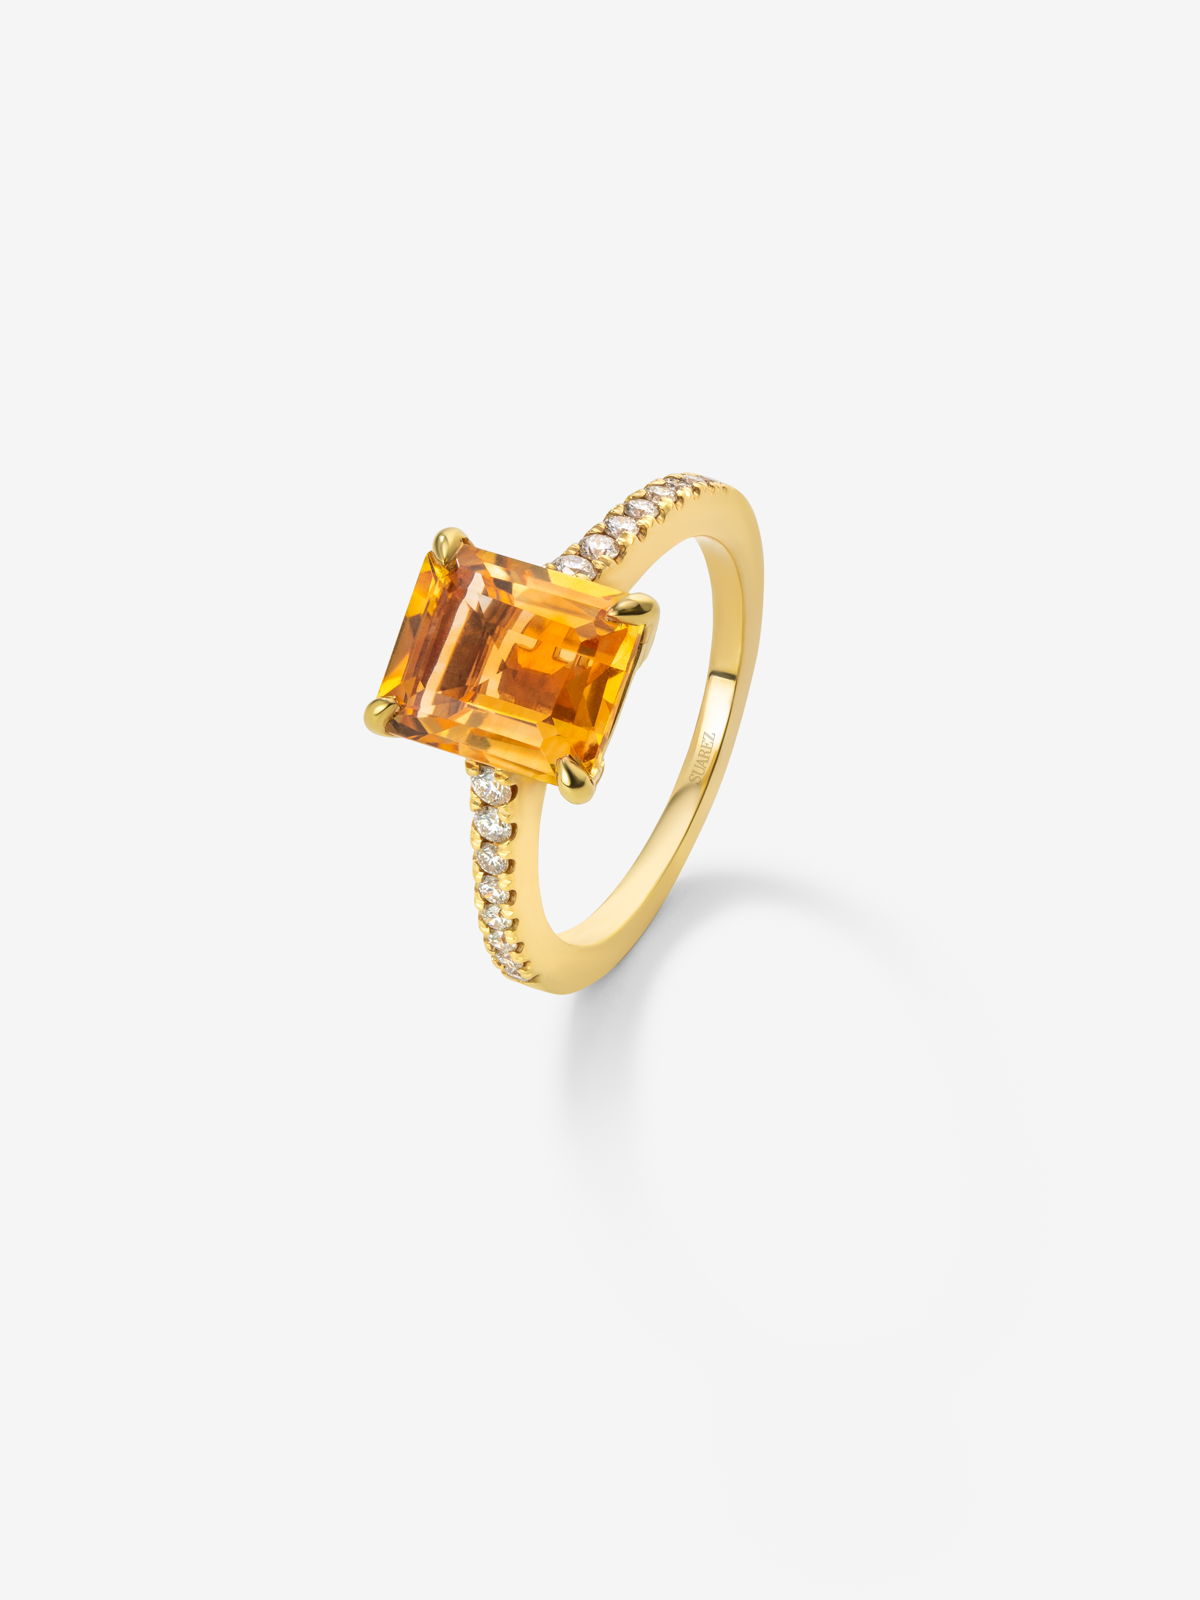 18K yellow gold ring with citrine quartz in emerald size 2.86 cts and diamonds in bright size